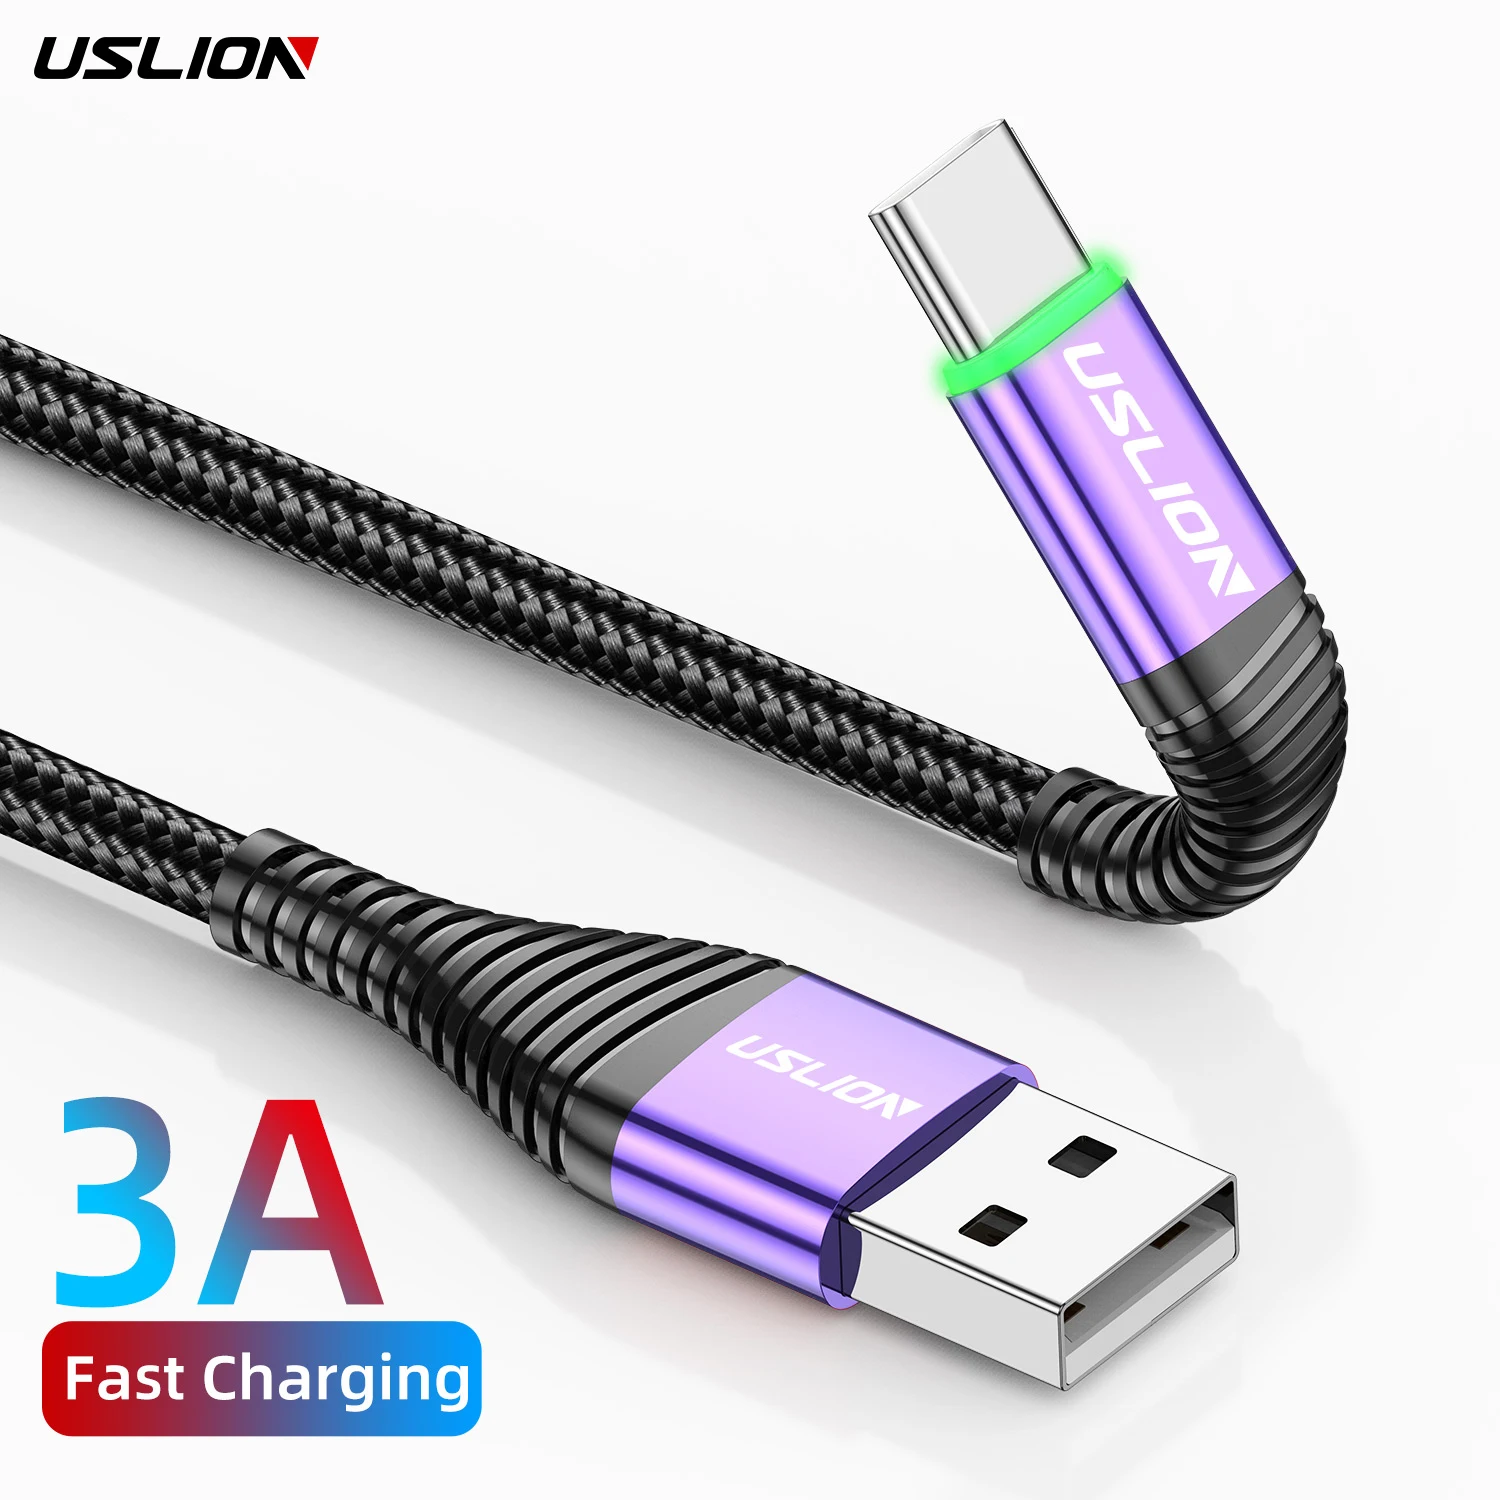 

USLION 1M 2M 3A Fast Charging Green LED Data Charger Cable Micro USB Type C Data Cable Mobile Phone USB Cable For Samsung, Black, blue, purple, red